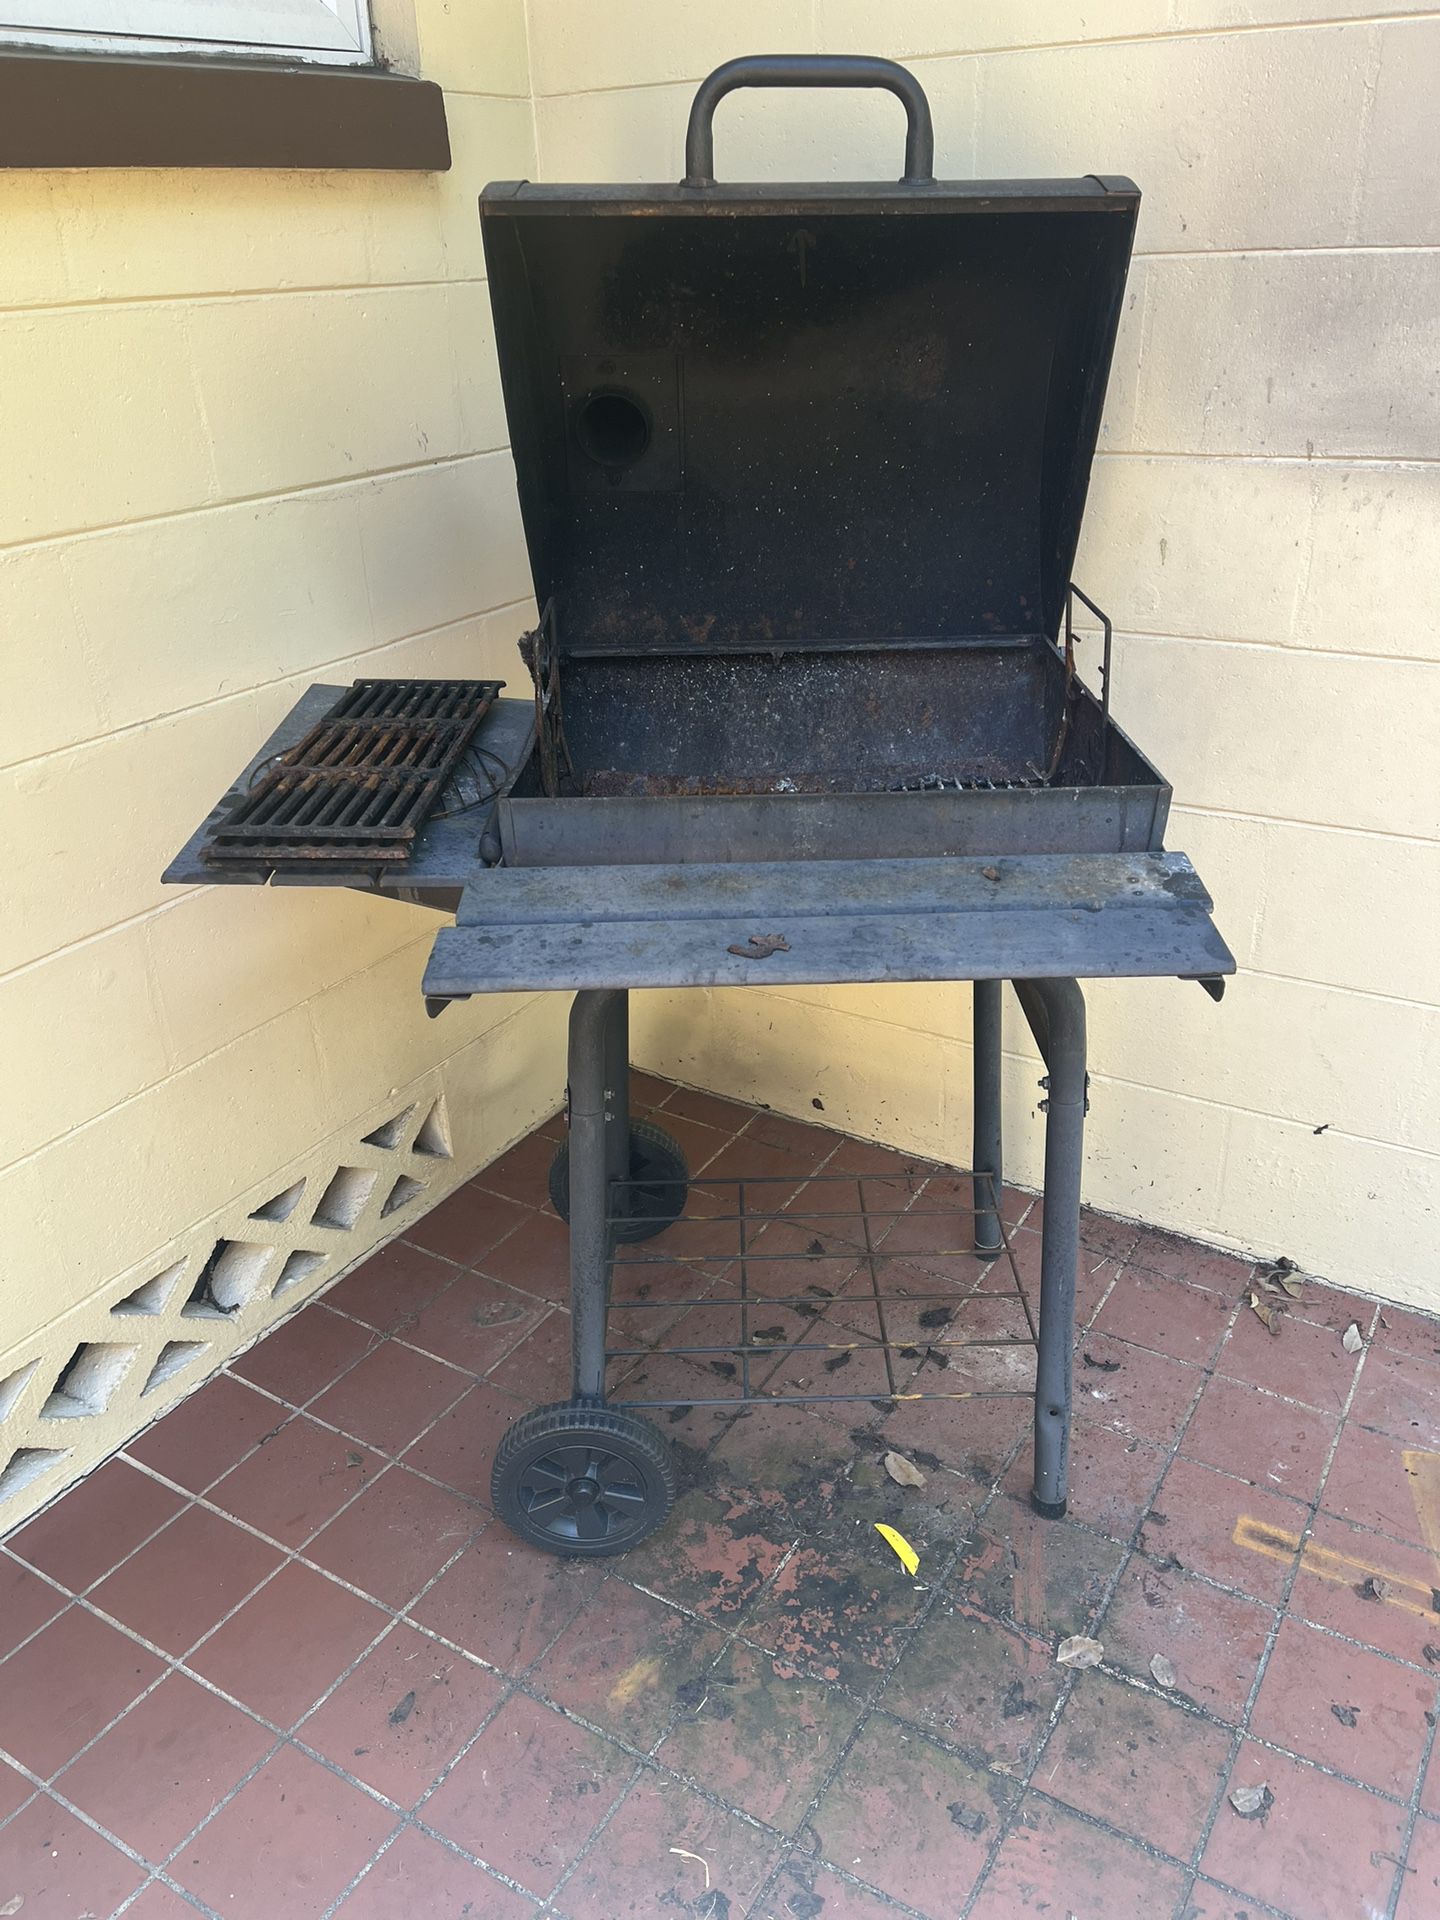 FREE Chargriller Charcoal grill - 22x20 Inch 